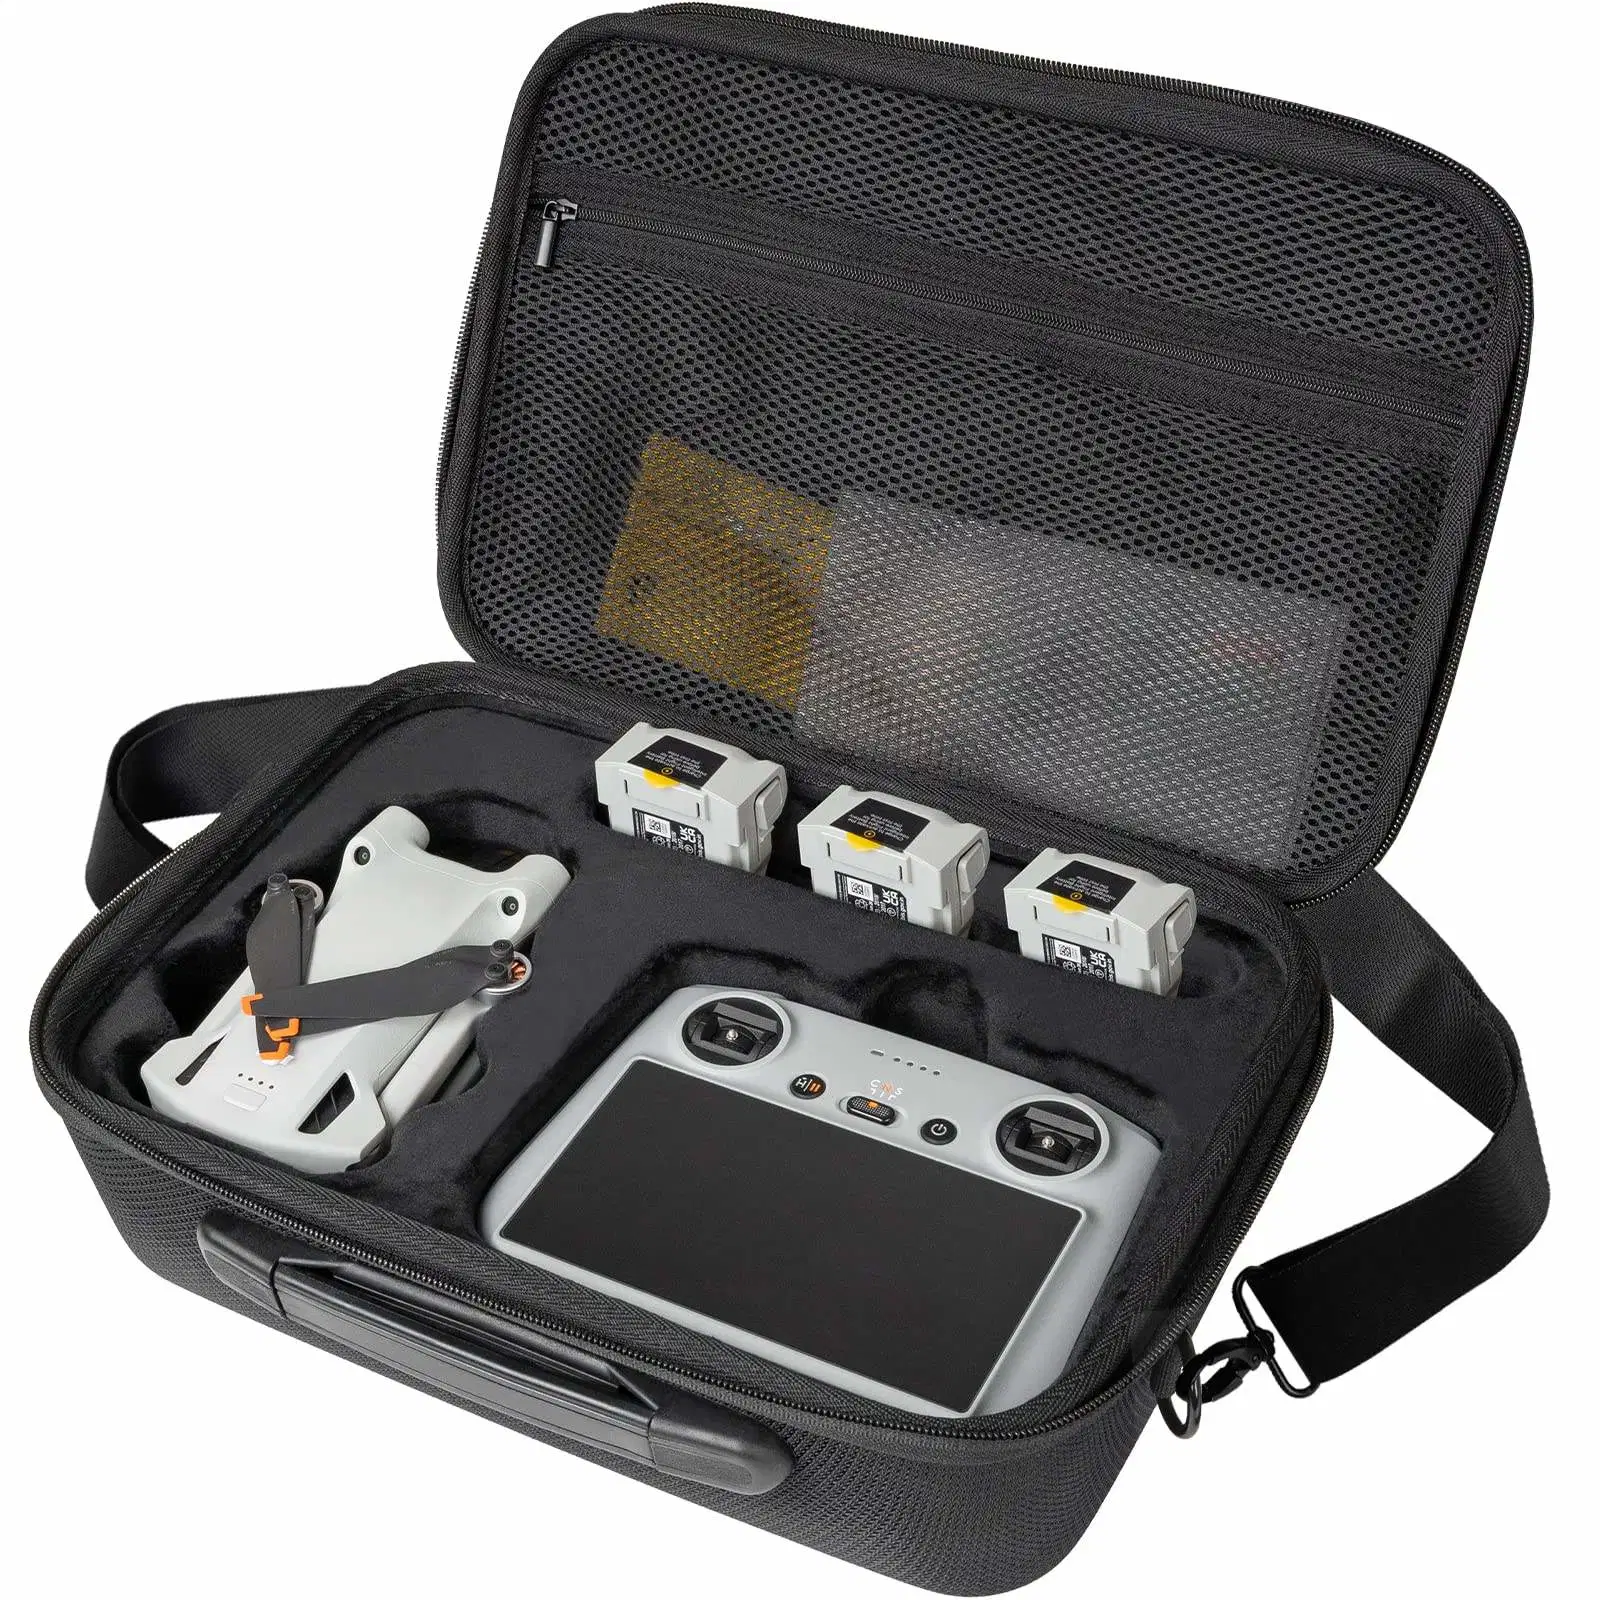 Shockproof Uav Hard Carrying Case for Dji Mini Drone Accessories Travel Storage Bag